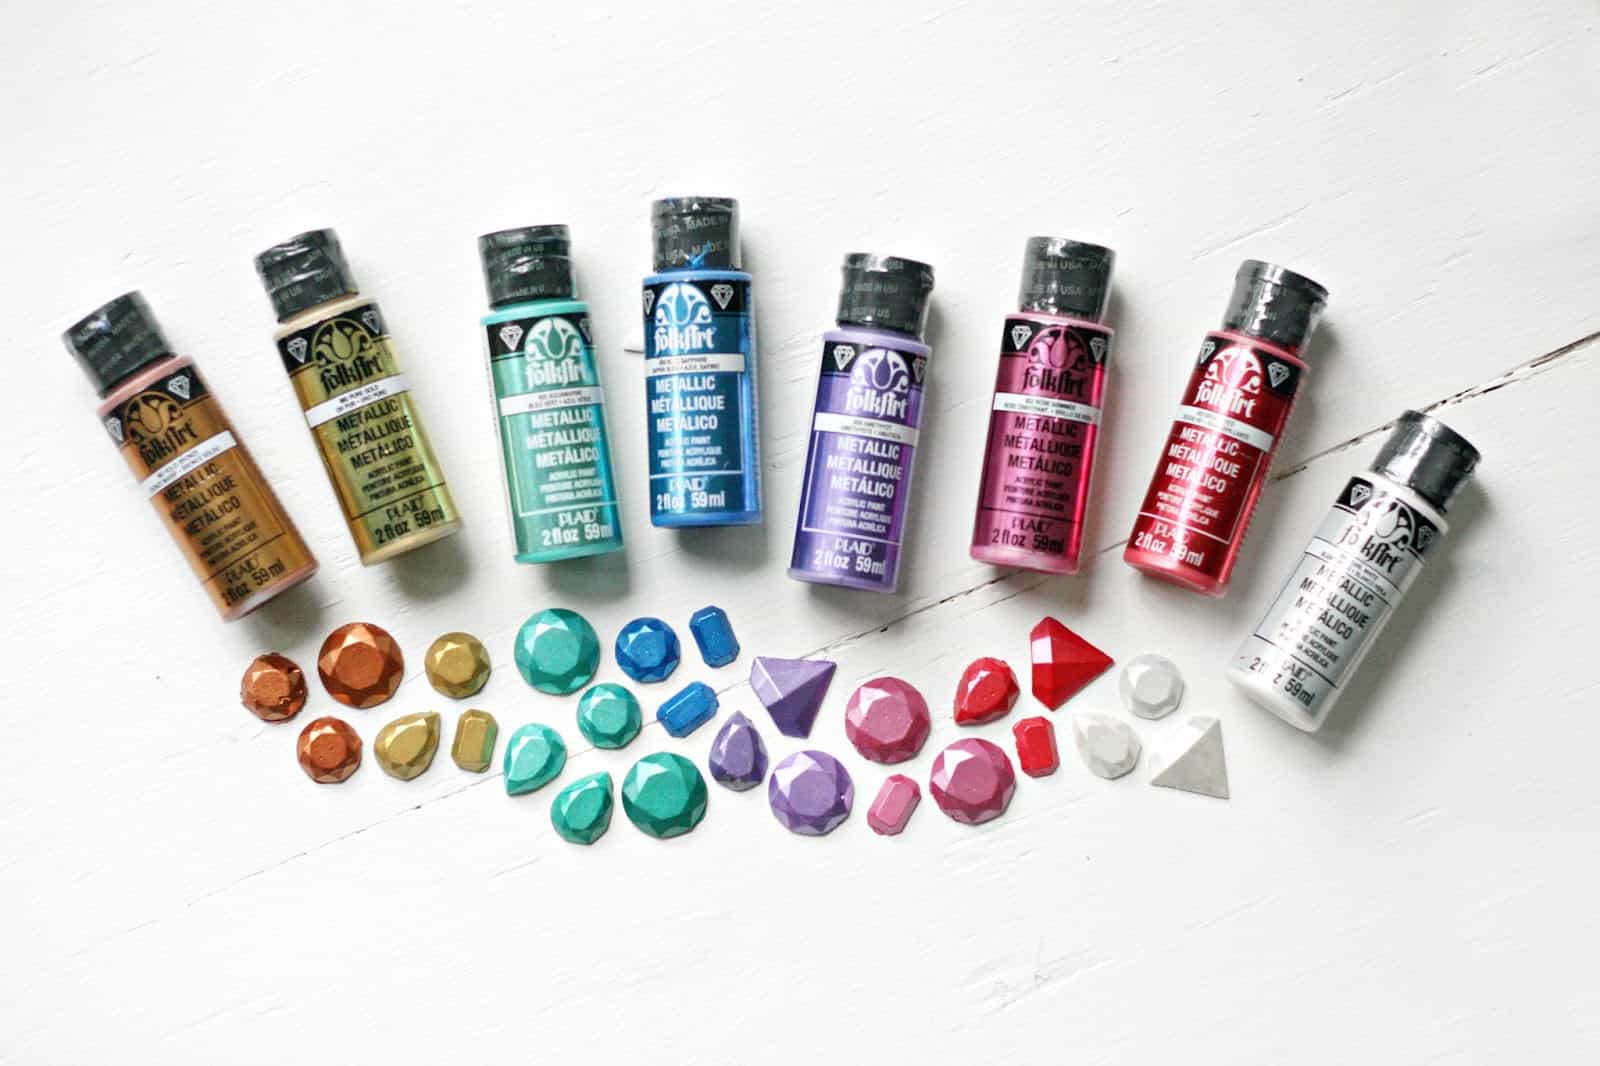 Hot glue gems painted with a rainbow of metallic acrylic paint